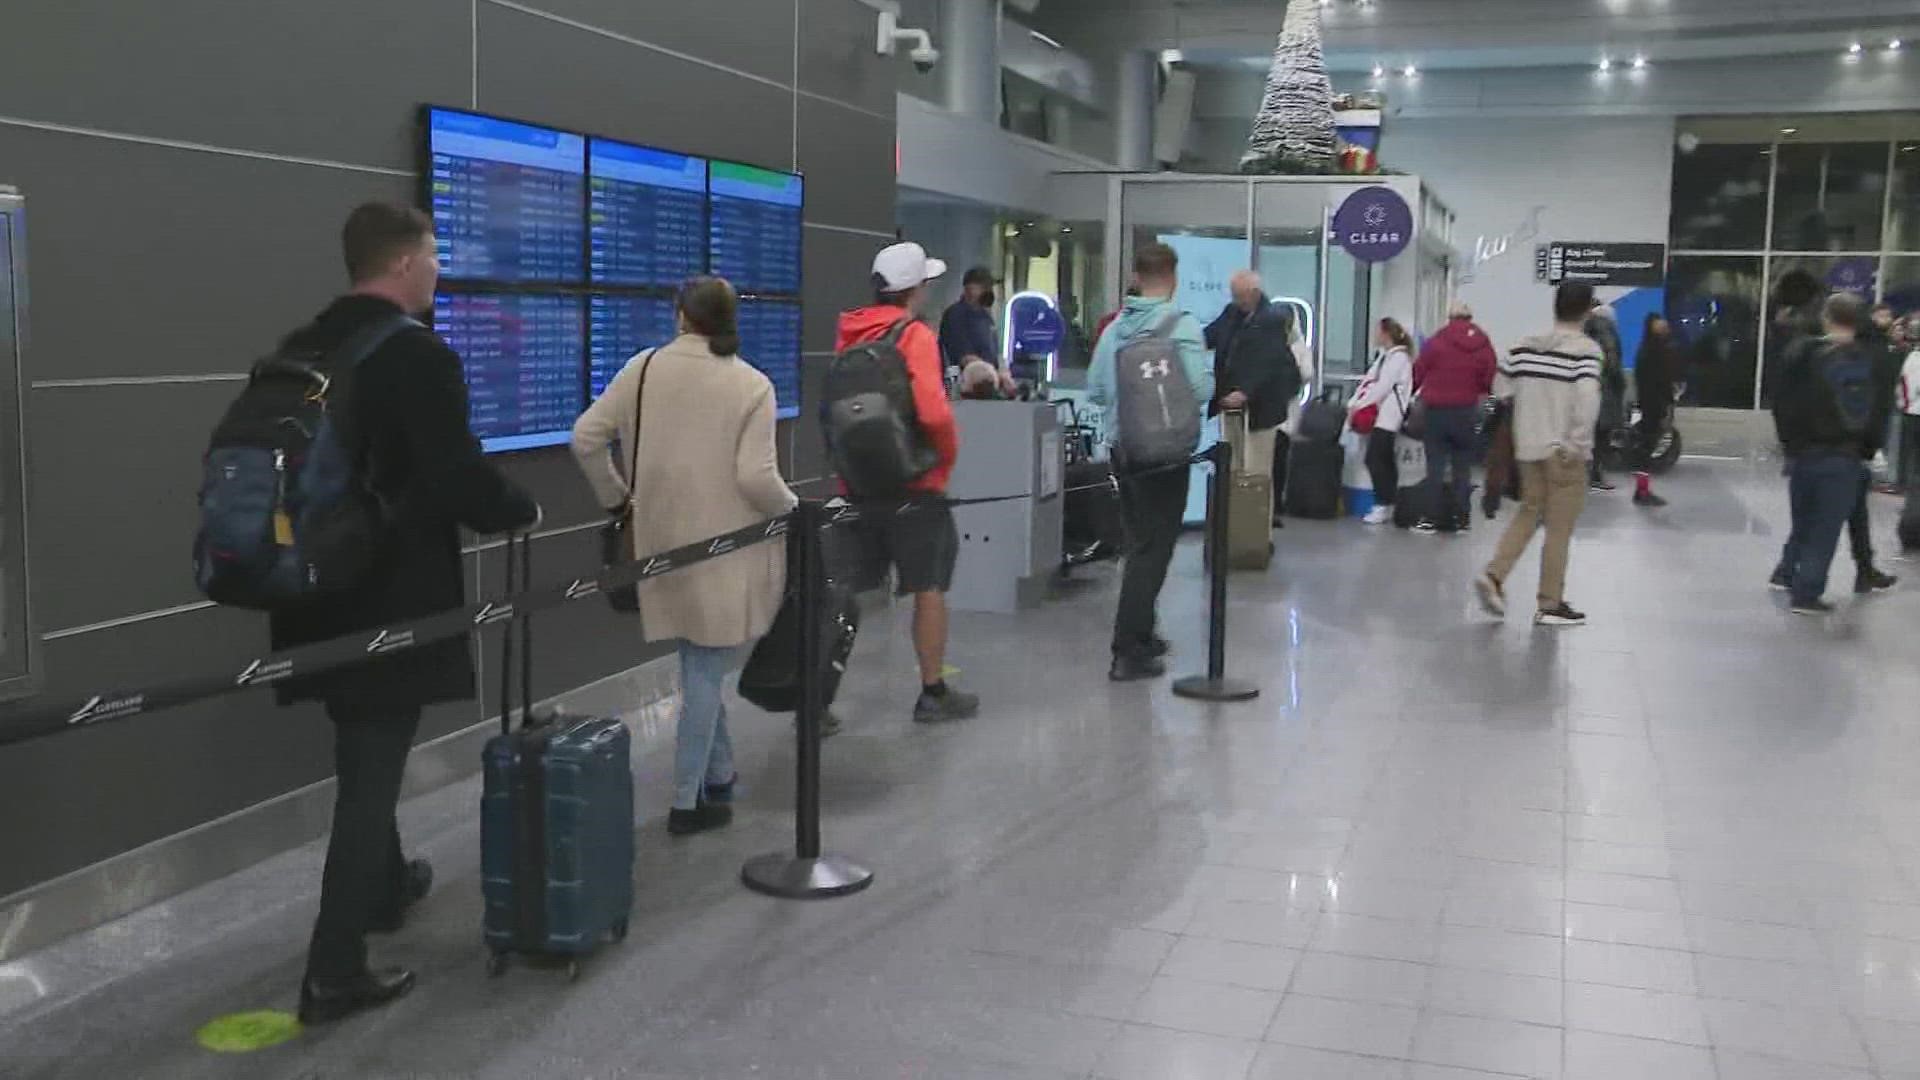 It's a busy travel day as millions return home after Thanksgiving. Here's a check on travel conditions at Cleveland Hopkins International Airport.